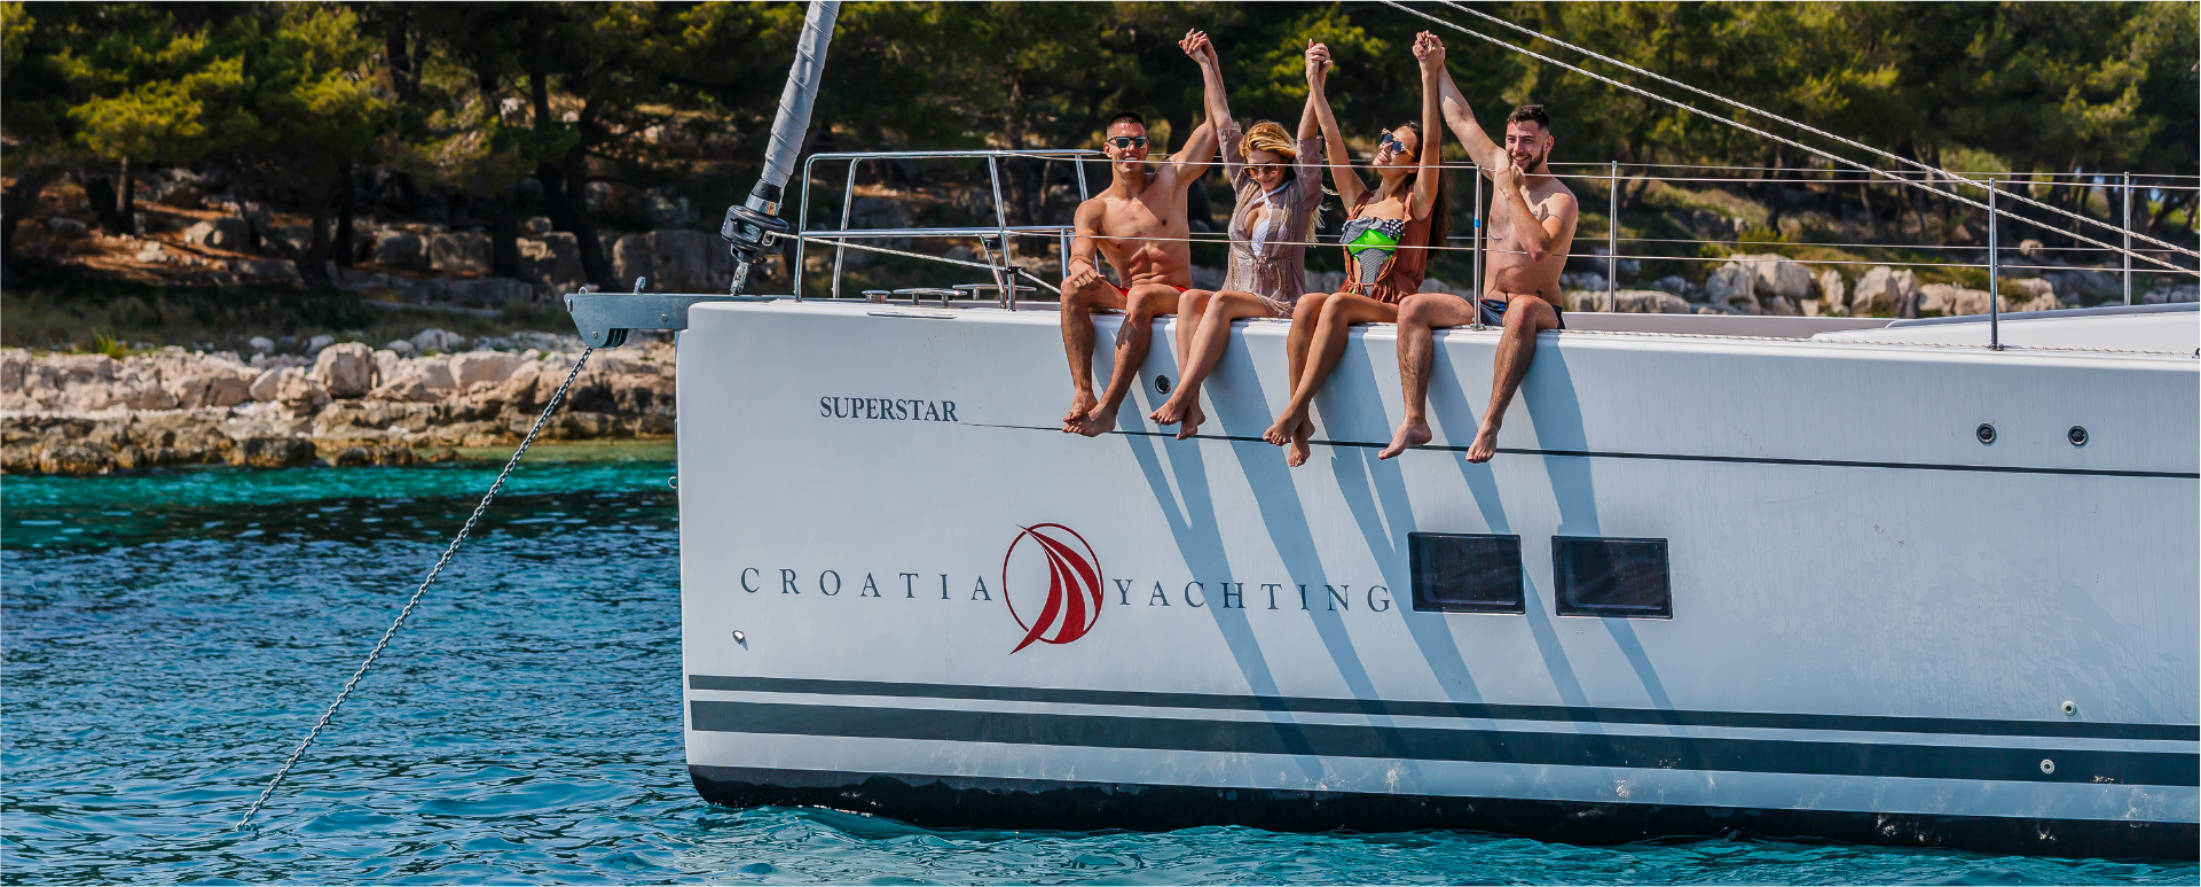 Experience charter lifestyle like never before